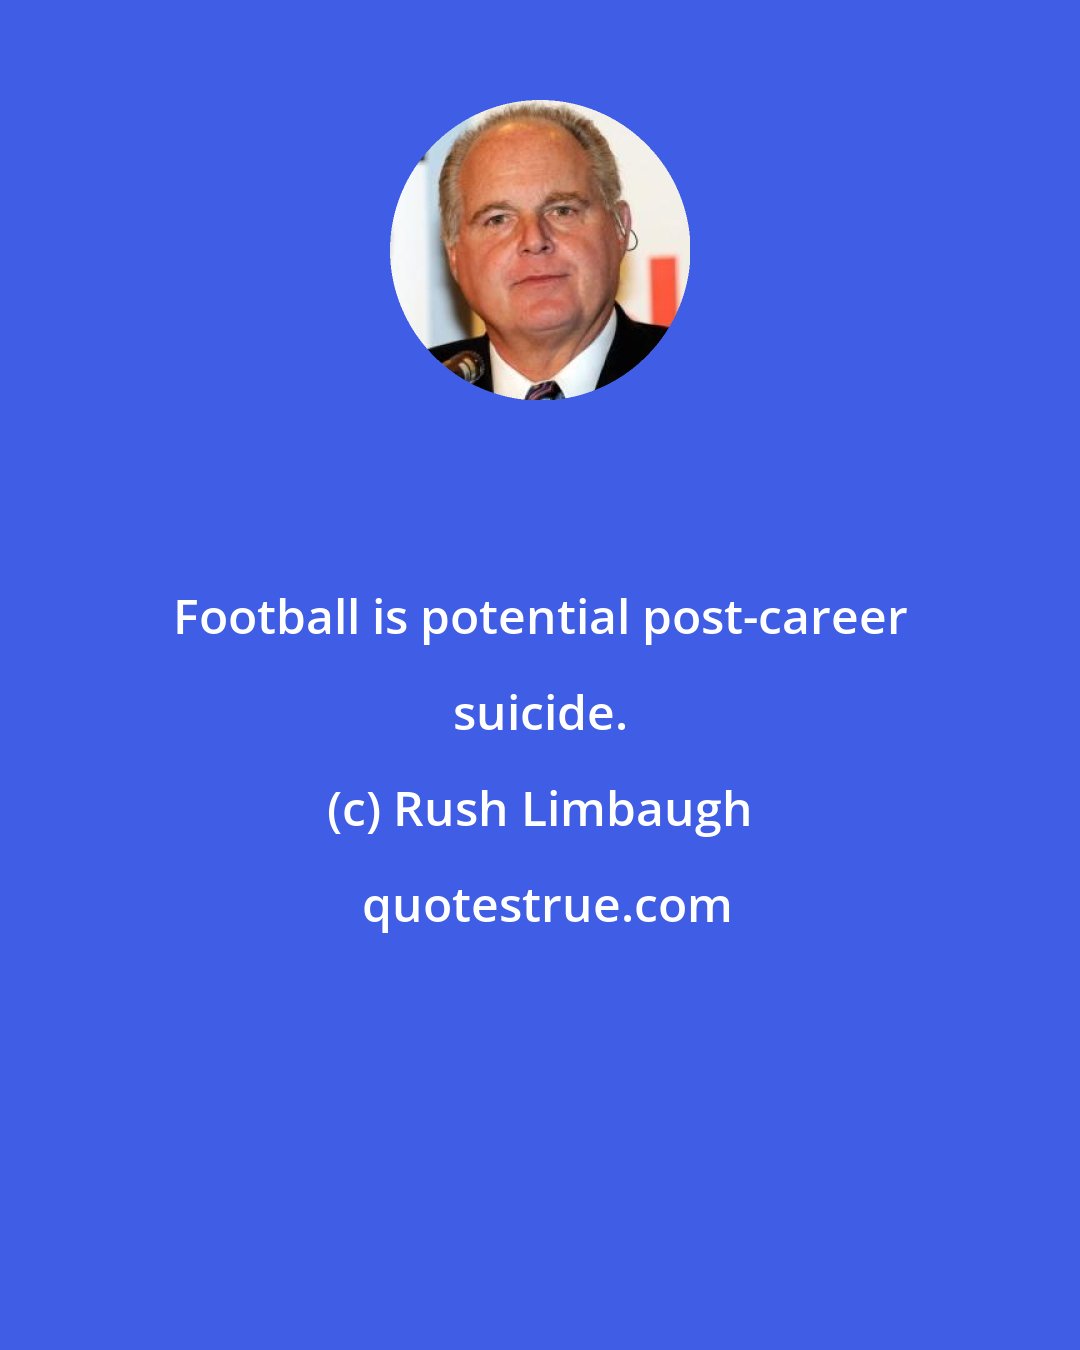 Rush Limbaugh: Football is potential post-career suicide.